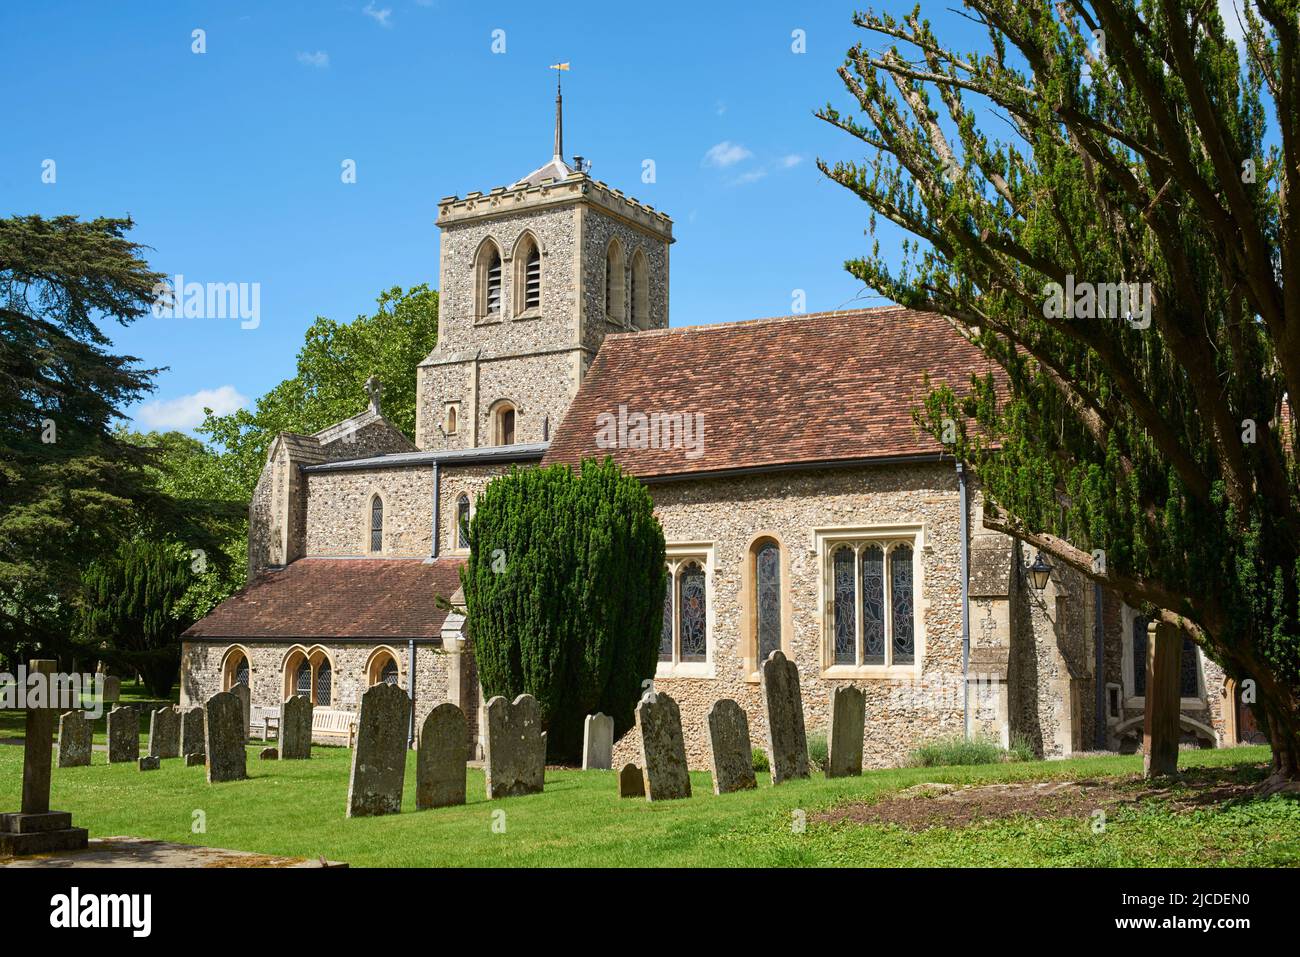 The ancient 10th and 11th century church of St Michael in the city of St Albans, Hertfordshire, Southern England Stock Photo